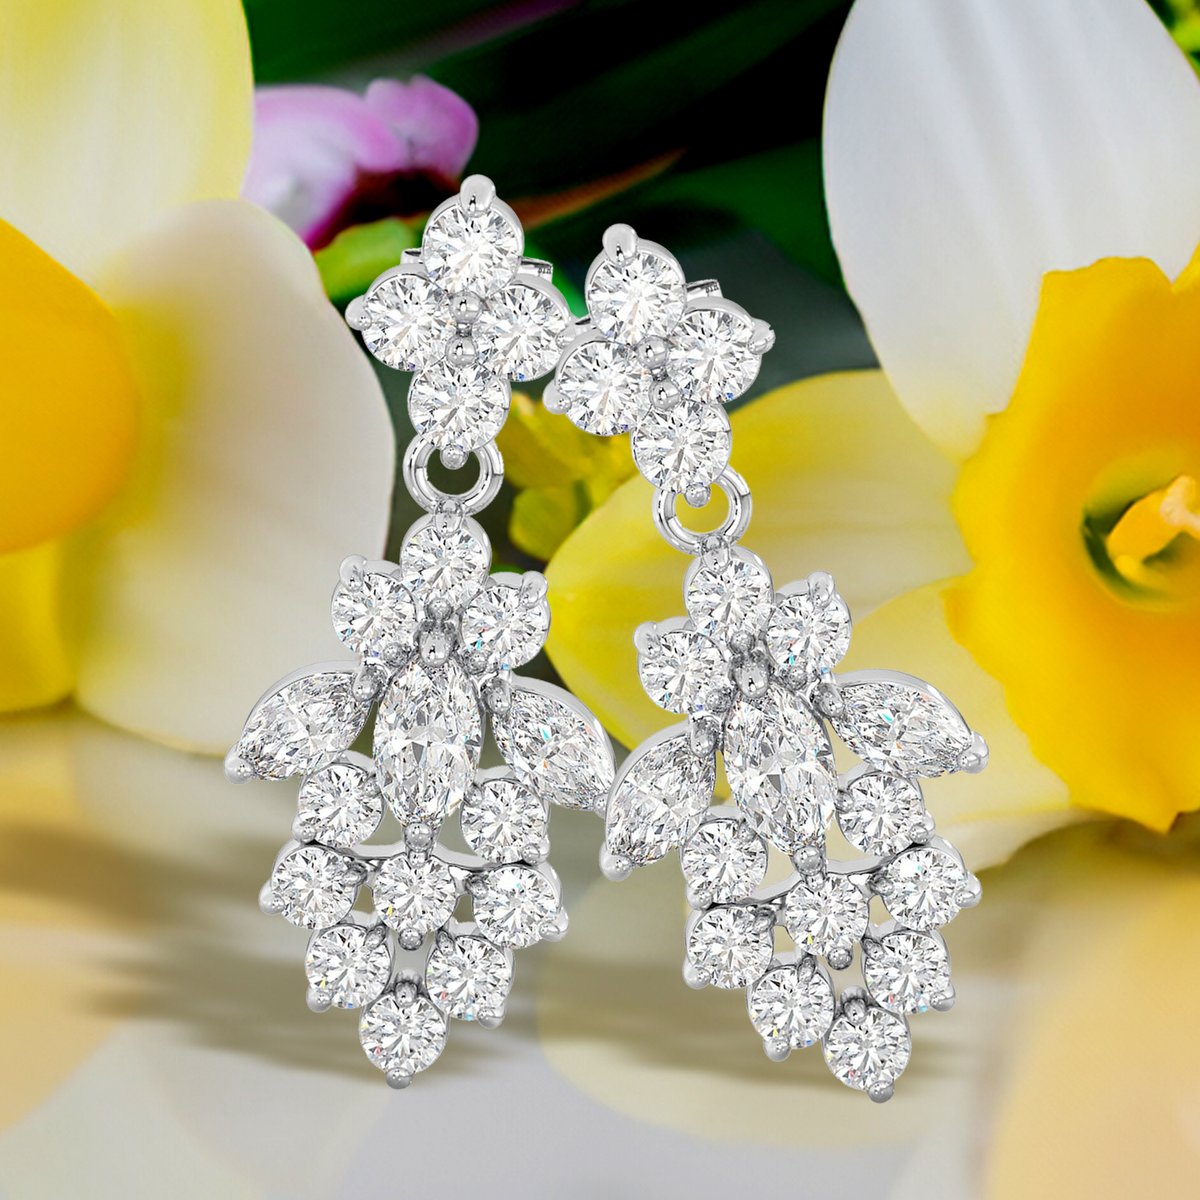 ✨ 925 Sterling Silver Cubic Zirconia Drop Dangle Bridal Earrings BUY NOW >> bit.ly/3jNKoh7 #weddingearrings #lovejewelry #silverjewelry #sterlingsilver #cubiczirconia #fashion #glamorous #besttohave #besttohavejewelry #gift #present #silverearrings